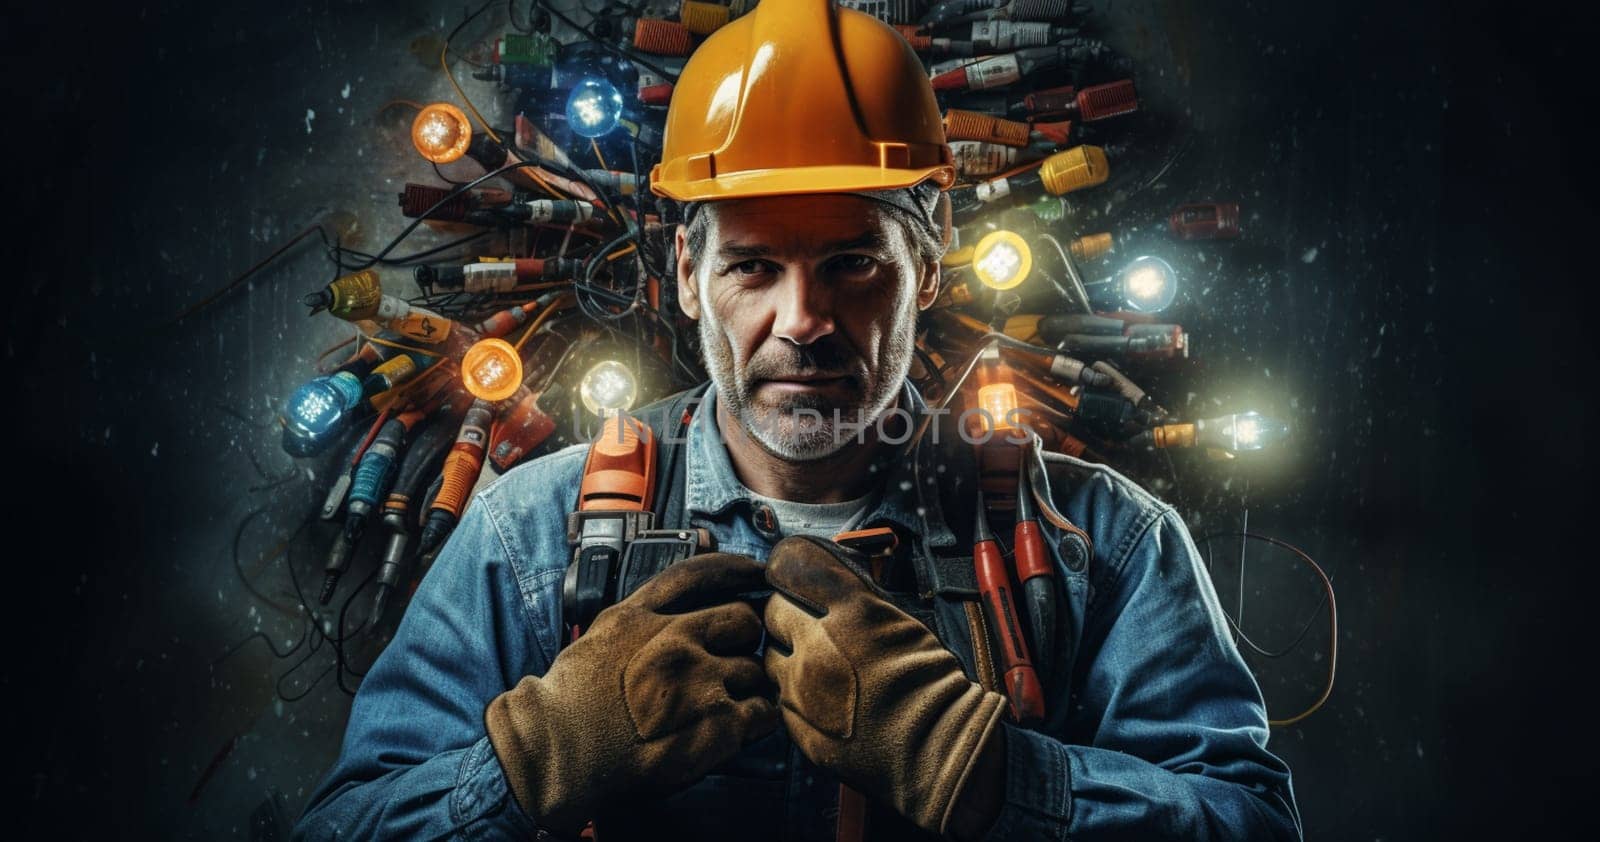 Portrait of Young Professional Heavy Industry Engineer Worker Wearing Safety Vest and Hardhat Smiling on Camera. In the Background Unfocused Large Industrial Factory where Welding Sparks Flying. by Andelov13